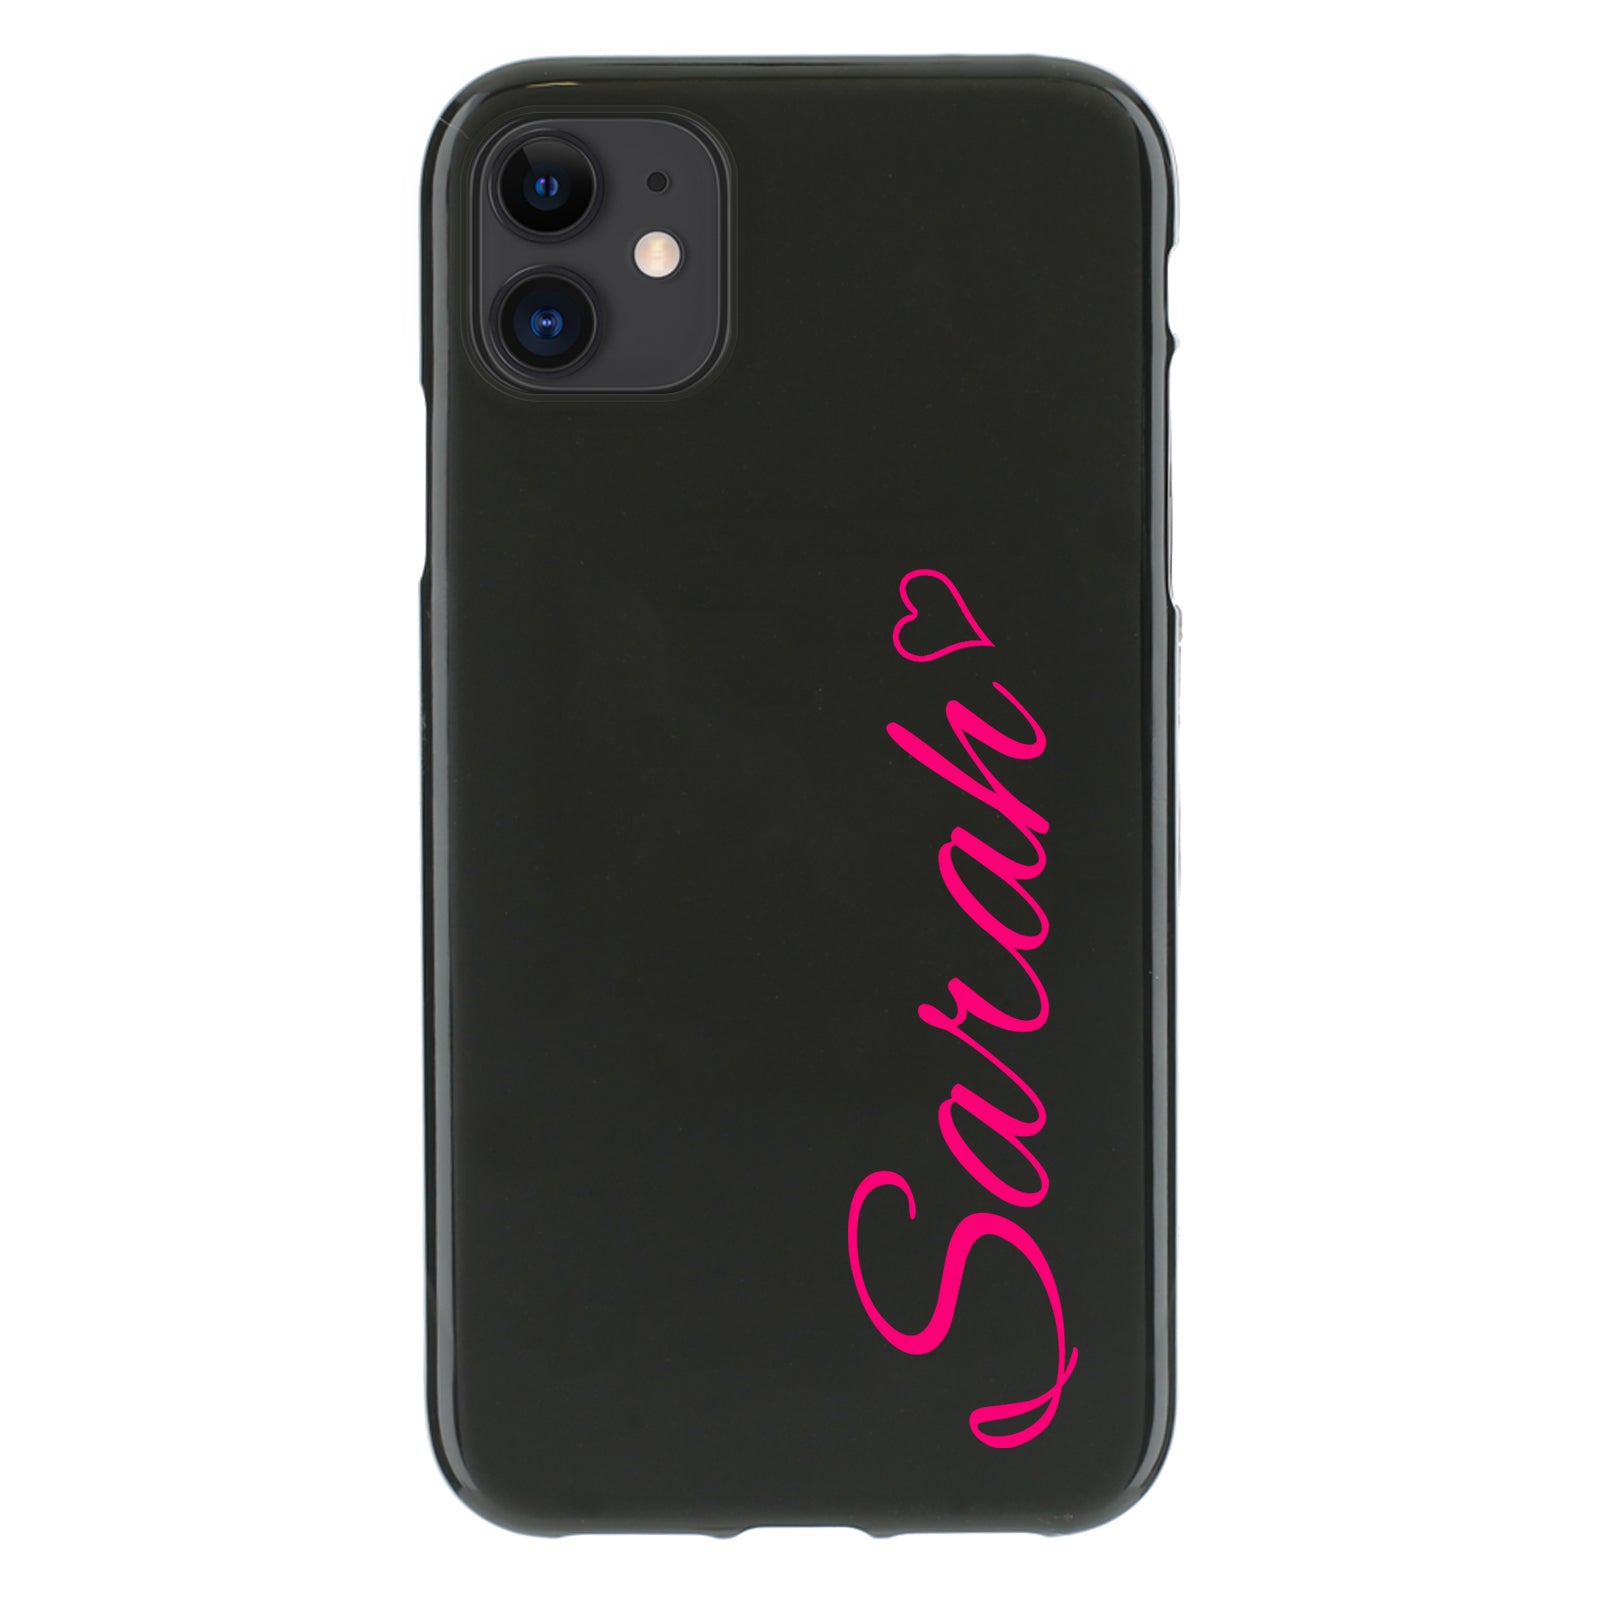 Personalised One Phone Gel Case with Hot Pink Heart Accented Text